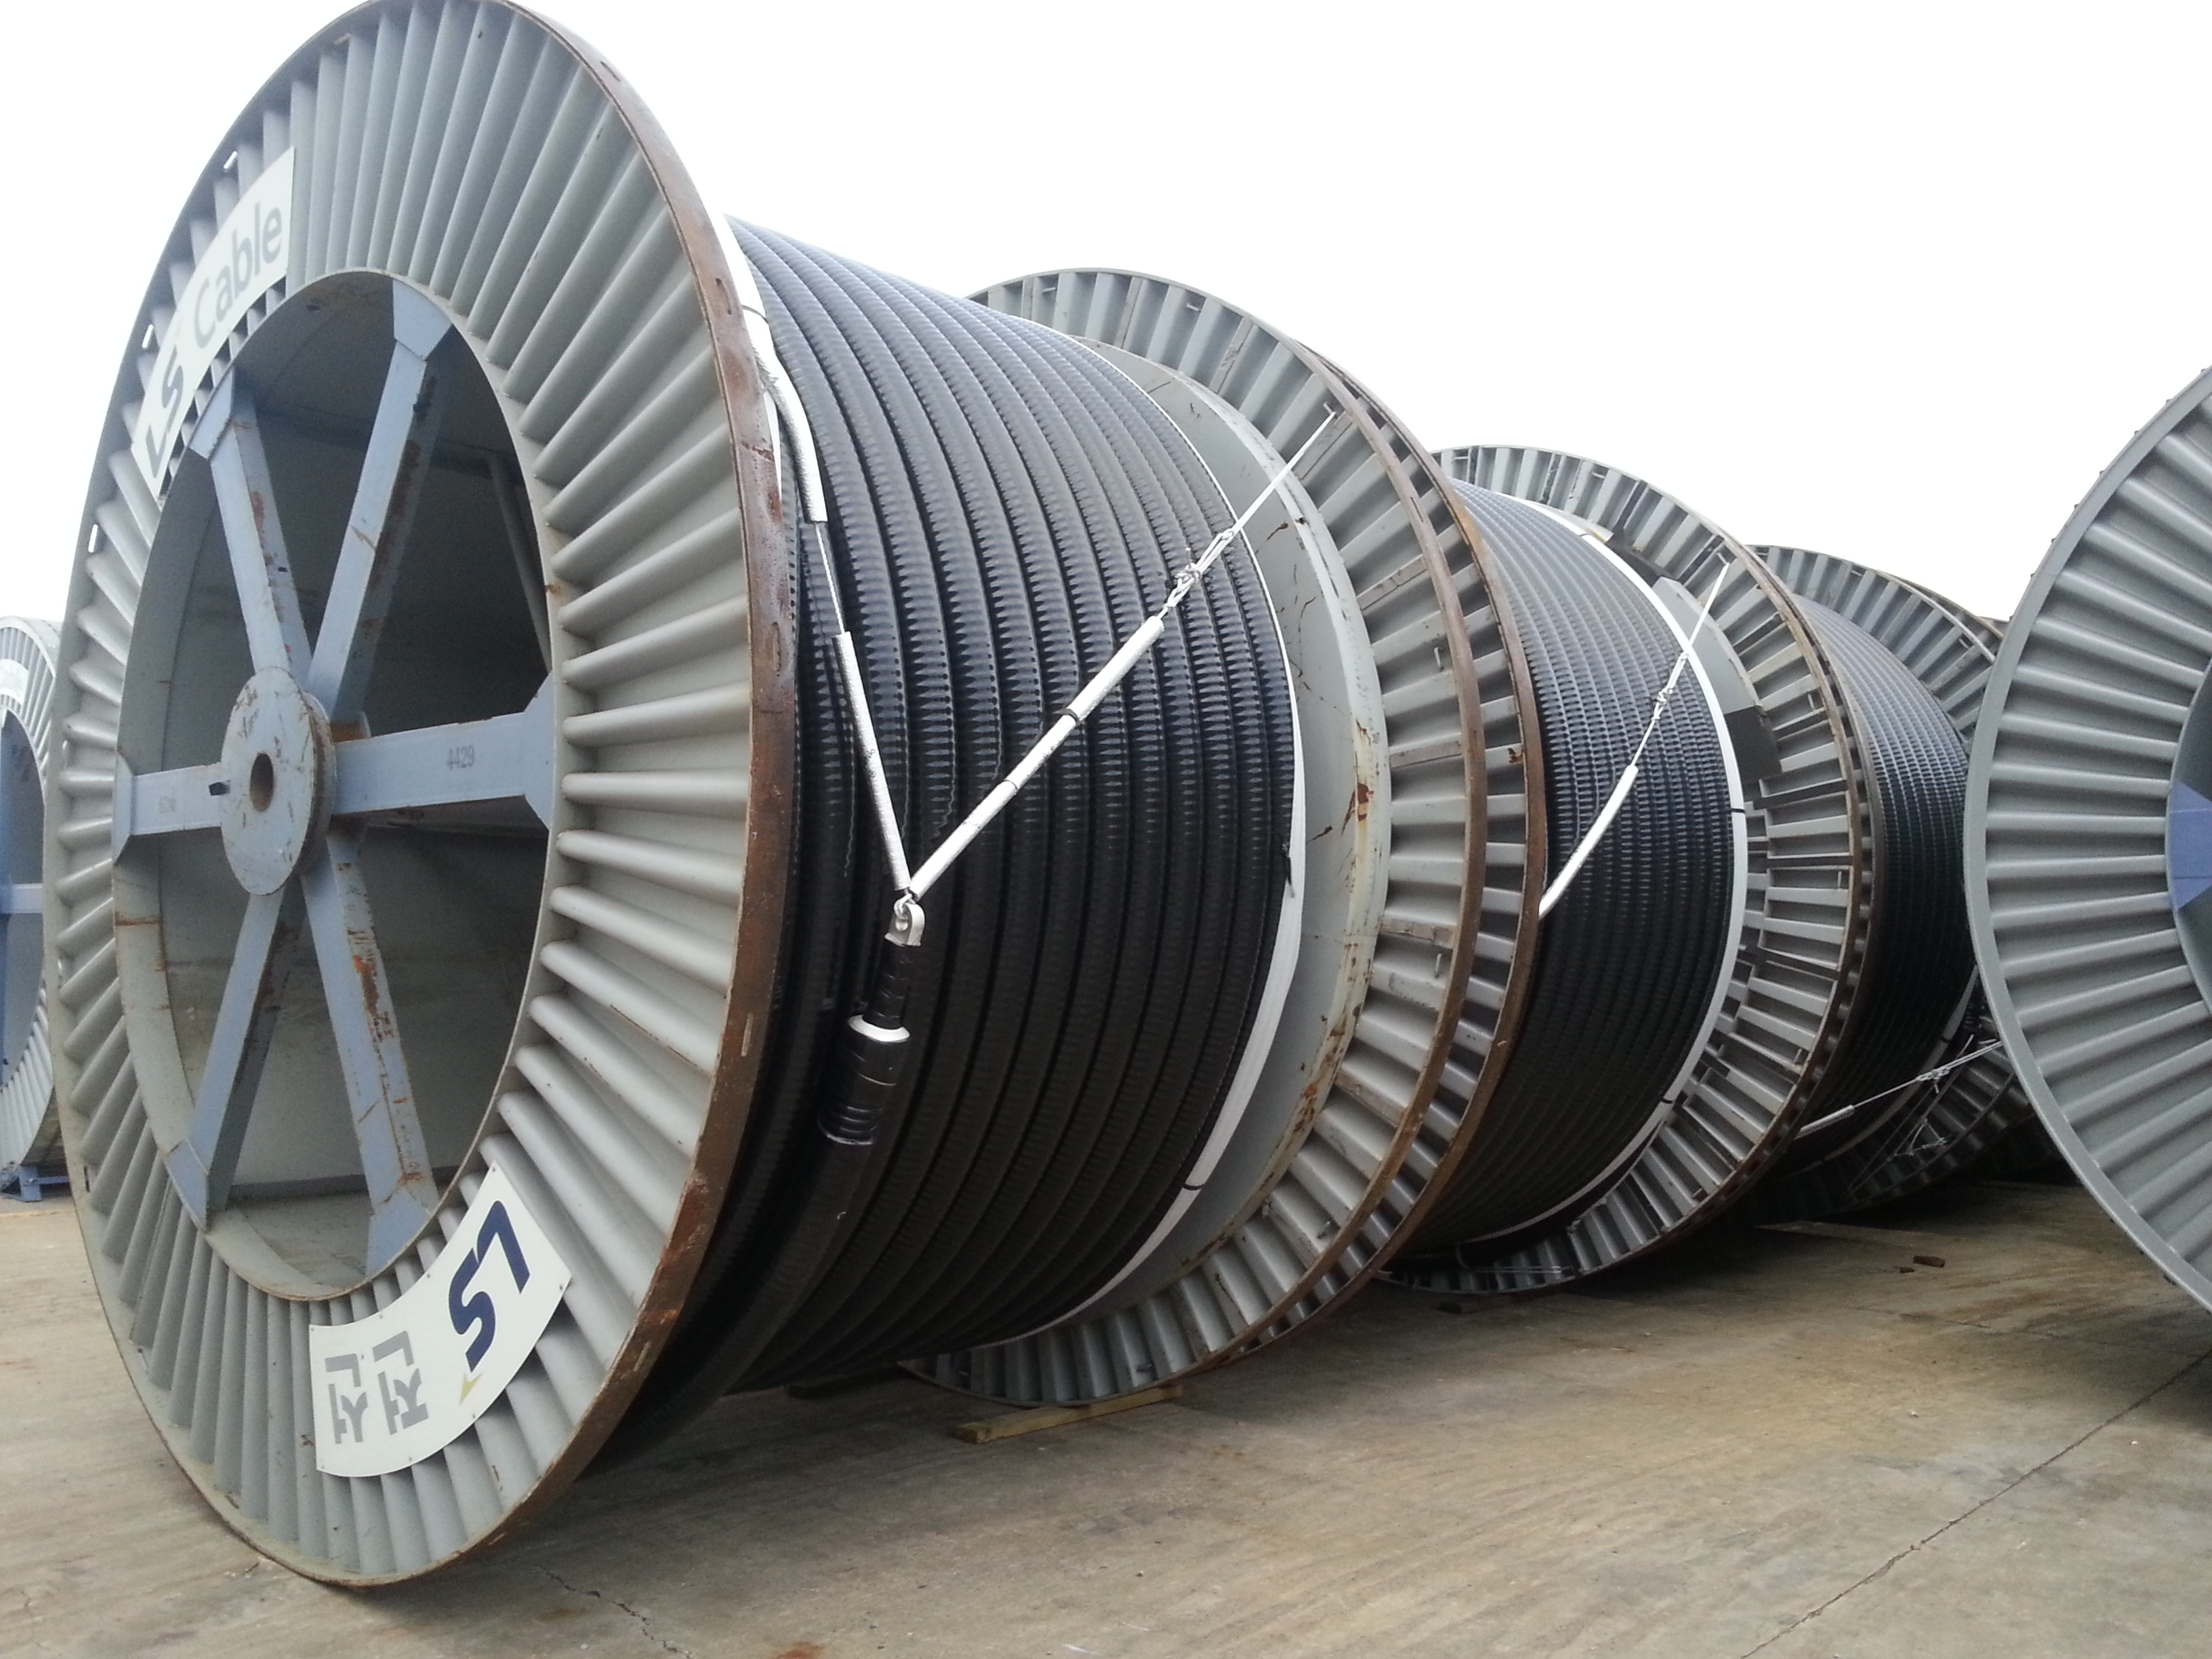 345 kV high voltage cables manufactured by LS Cable & System